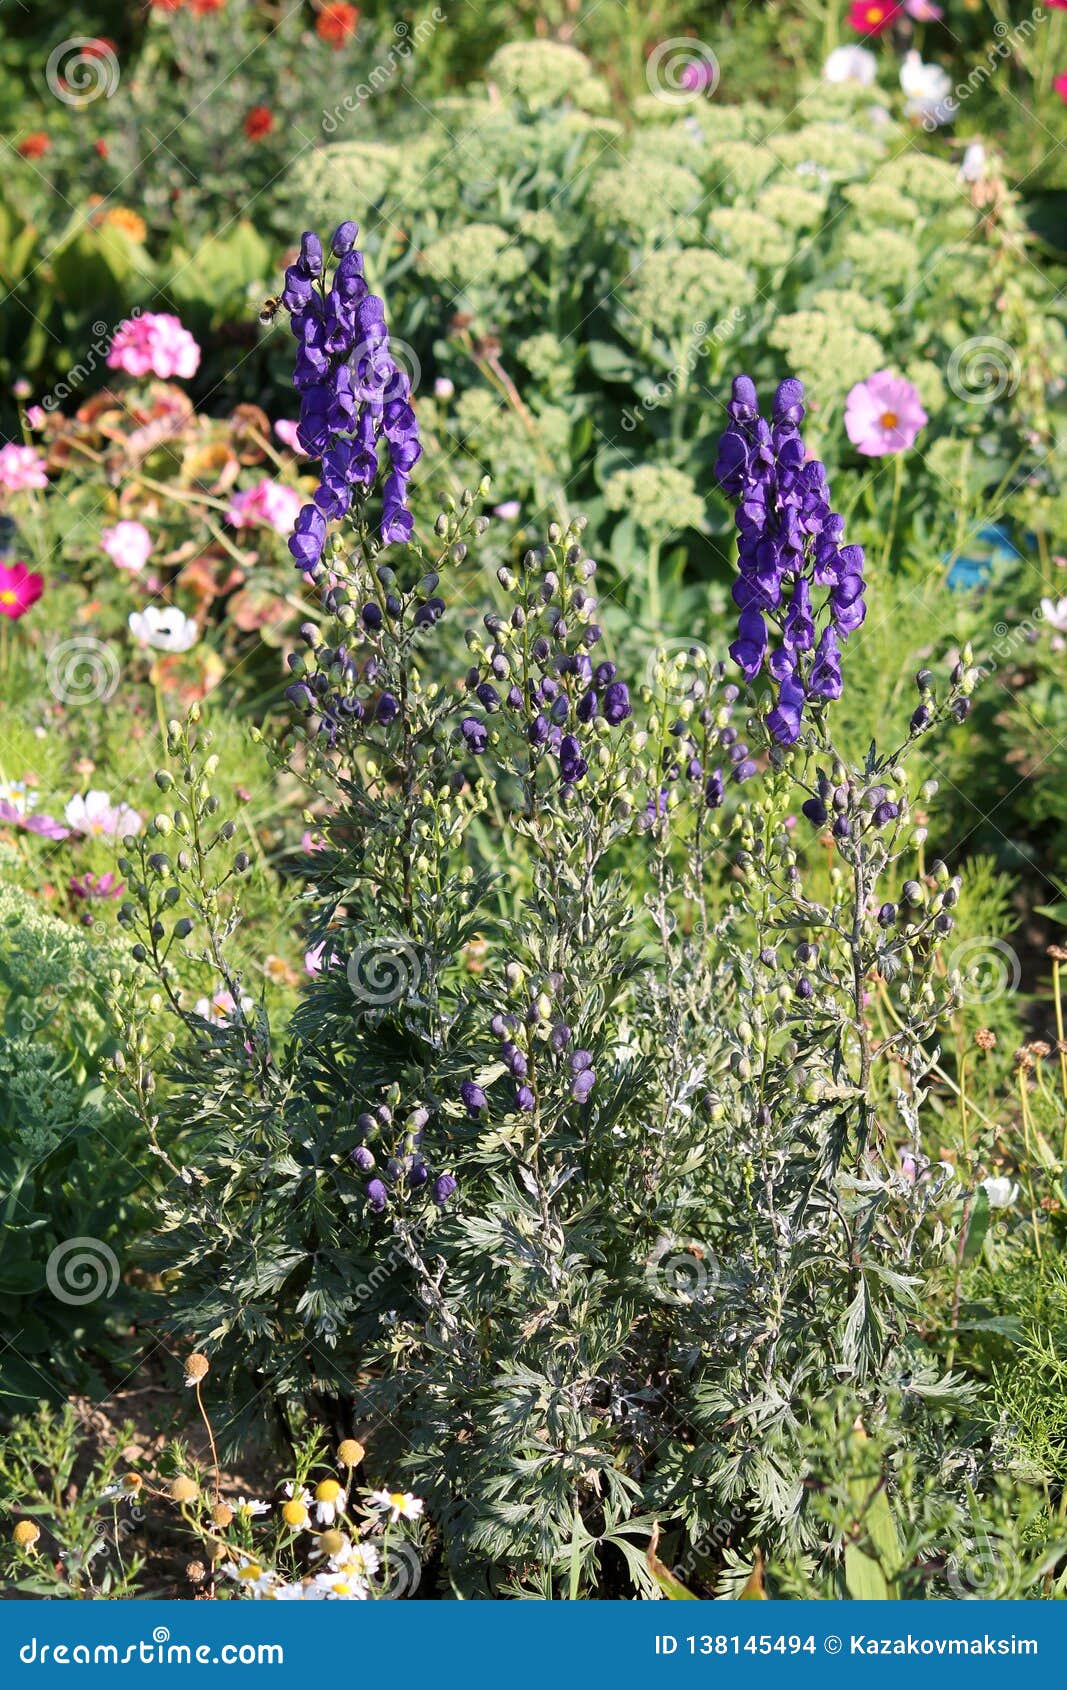 Aconite Or Aconitum Napellus With Blue Flowers General View Of Flowering Plant Stock Photo Image Of Dangerous Hood 138145494